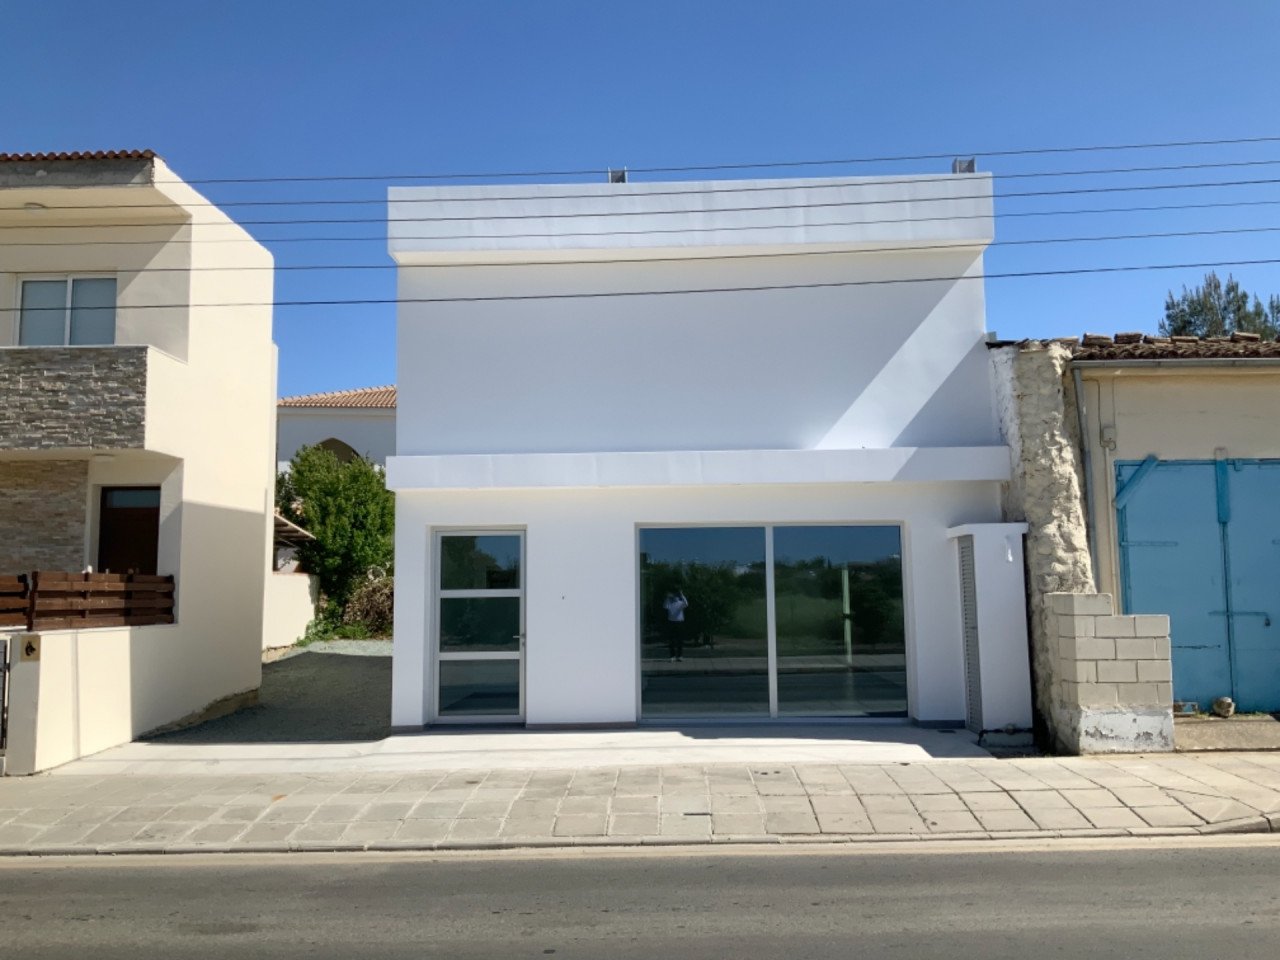 Property for Rent: Commercial (Shop) in Deftera Kato, Nicosia for Rent | Key Realtor Cyprus